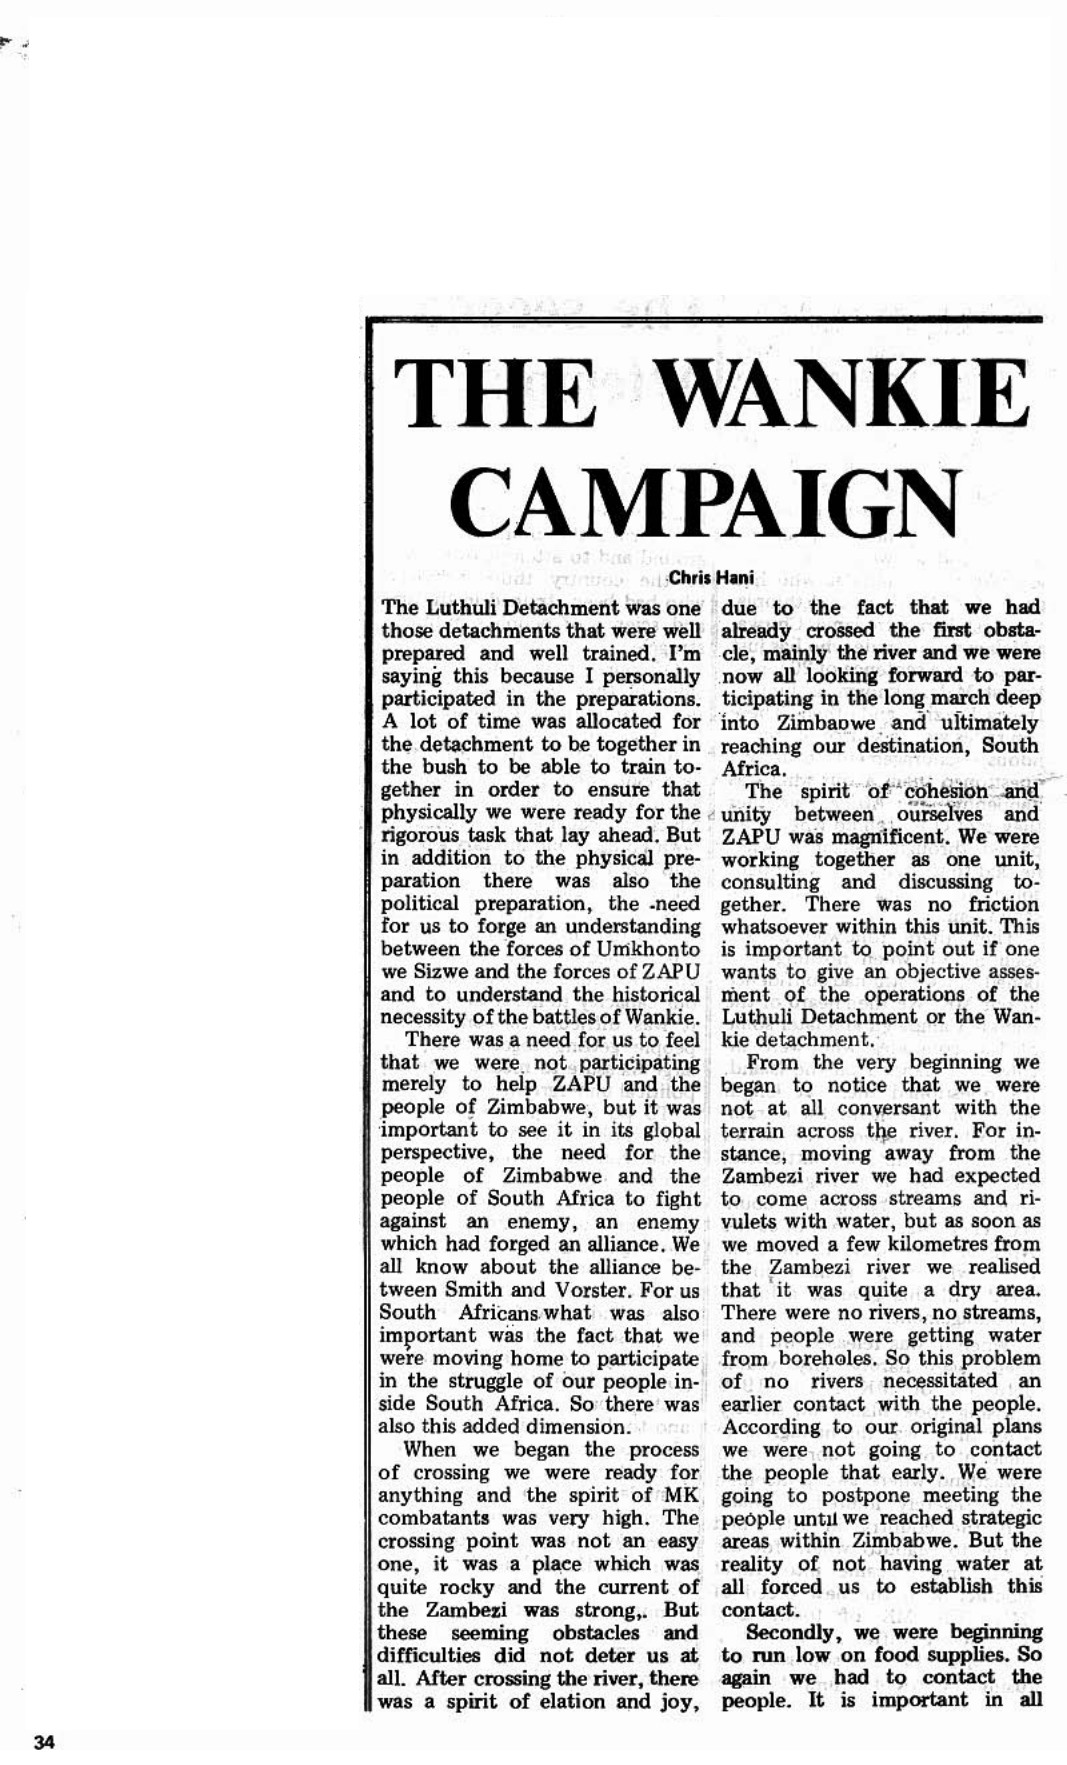 First page of article on The Wankie Campaigns published in 1986 in the journal Dawn